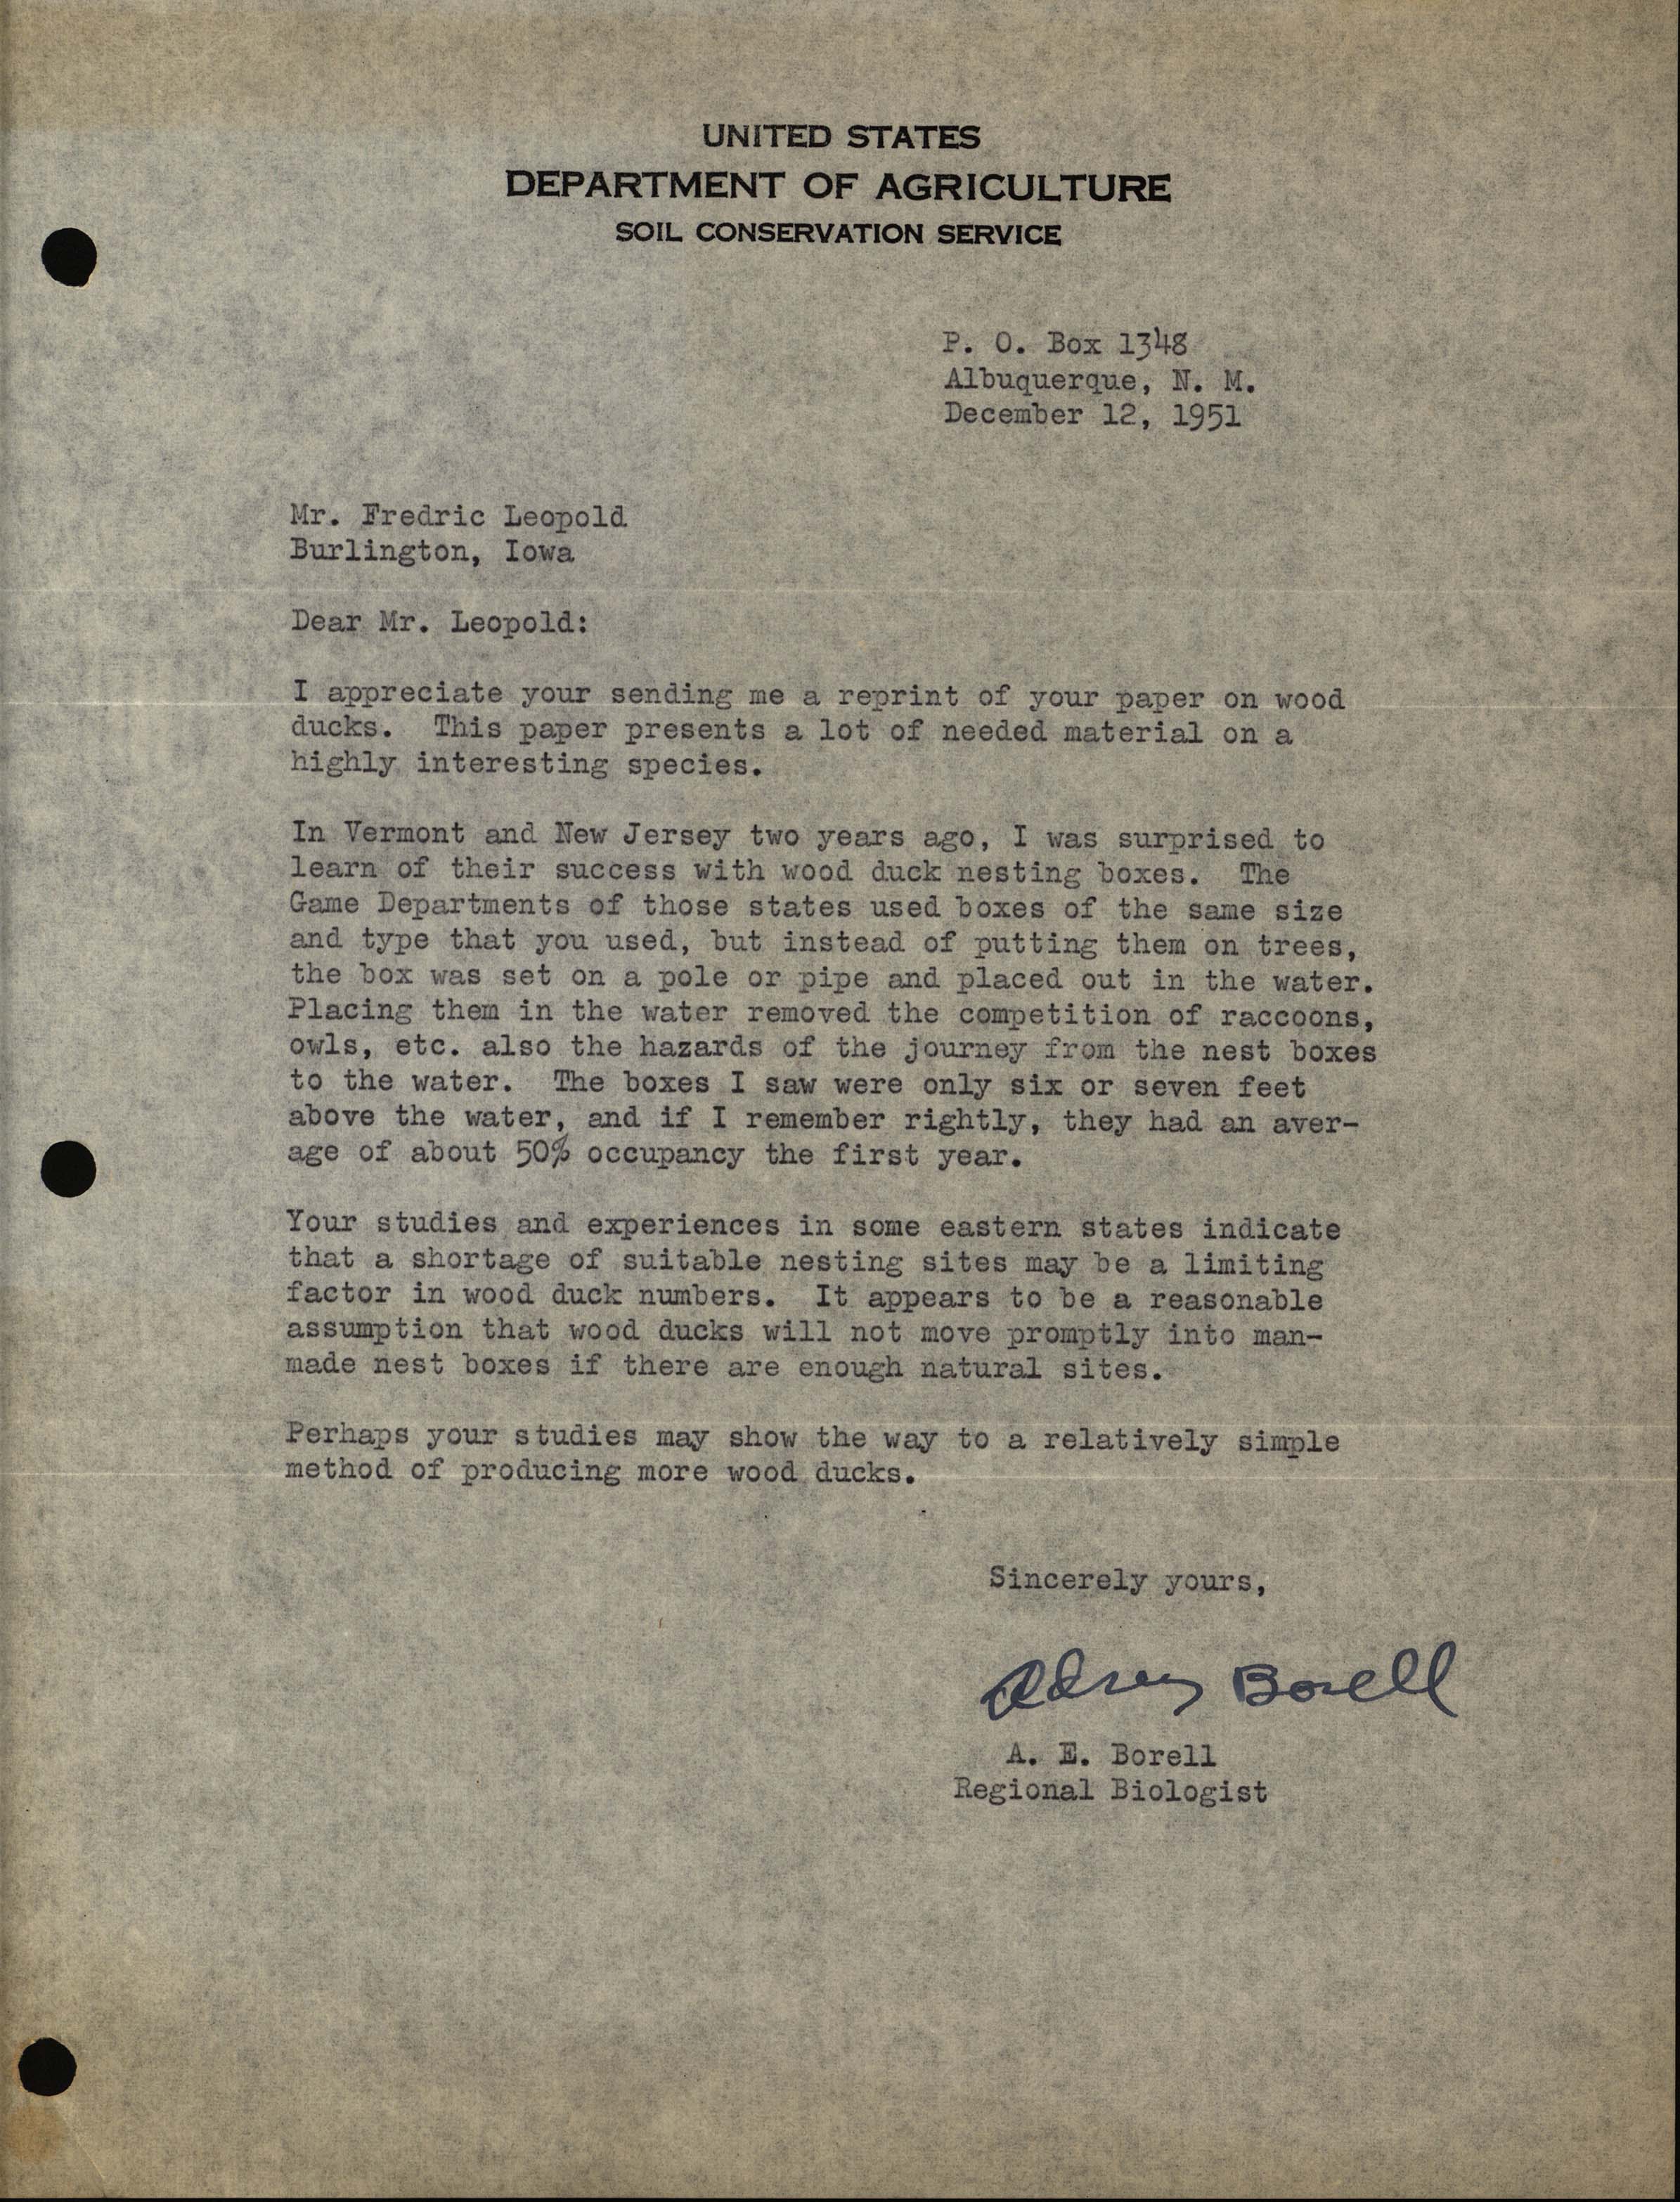 Adrey E. Borell letter to Frederic Leopold regarding Wood Duck houses, December 12, 1951